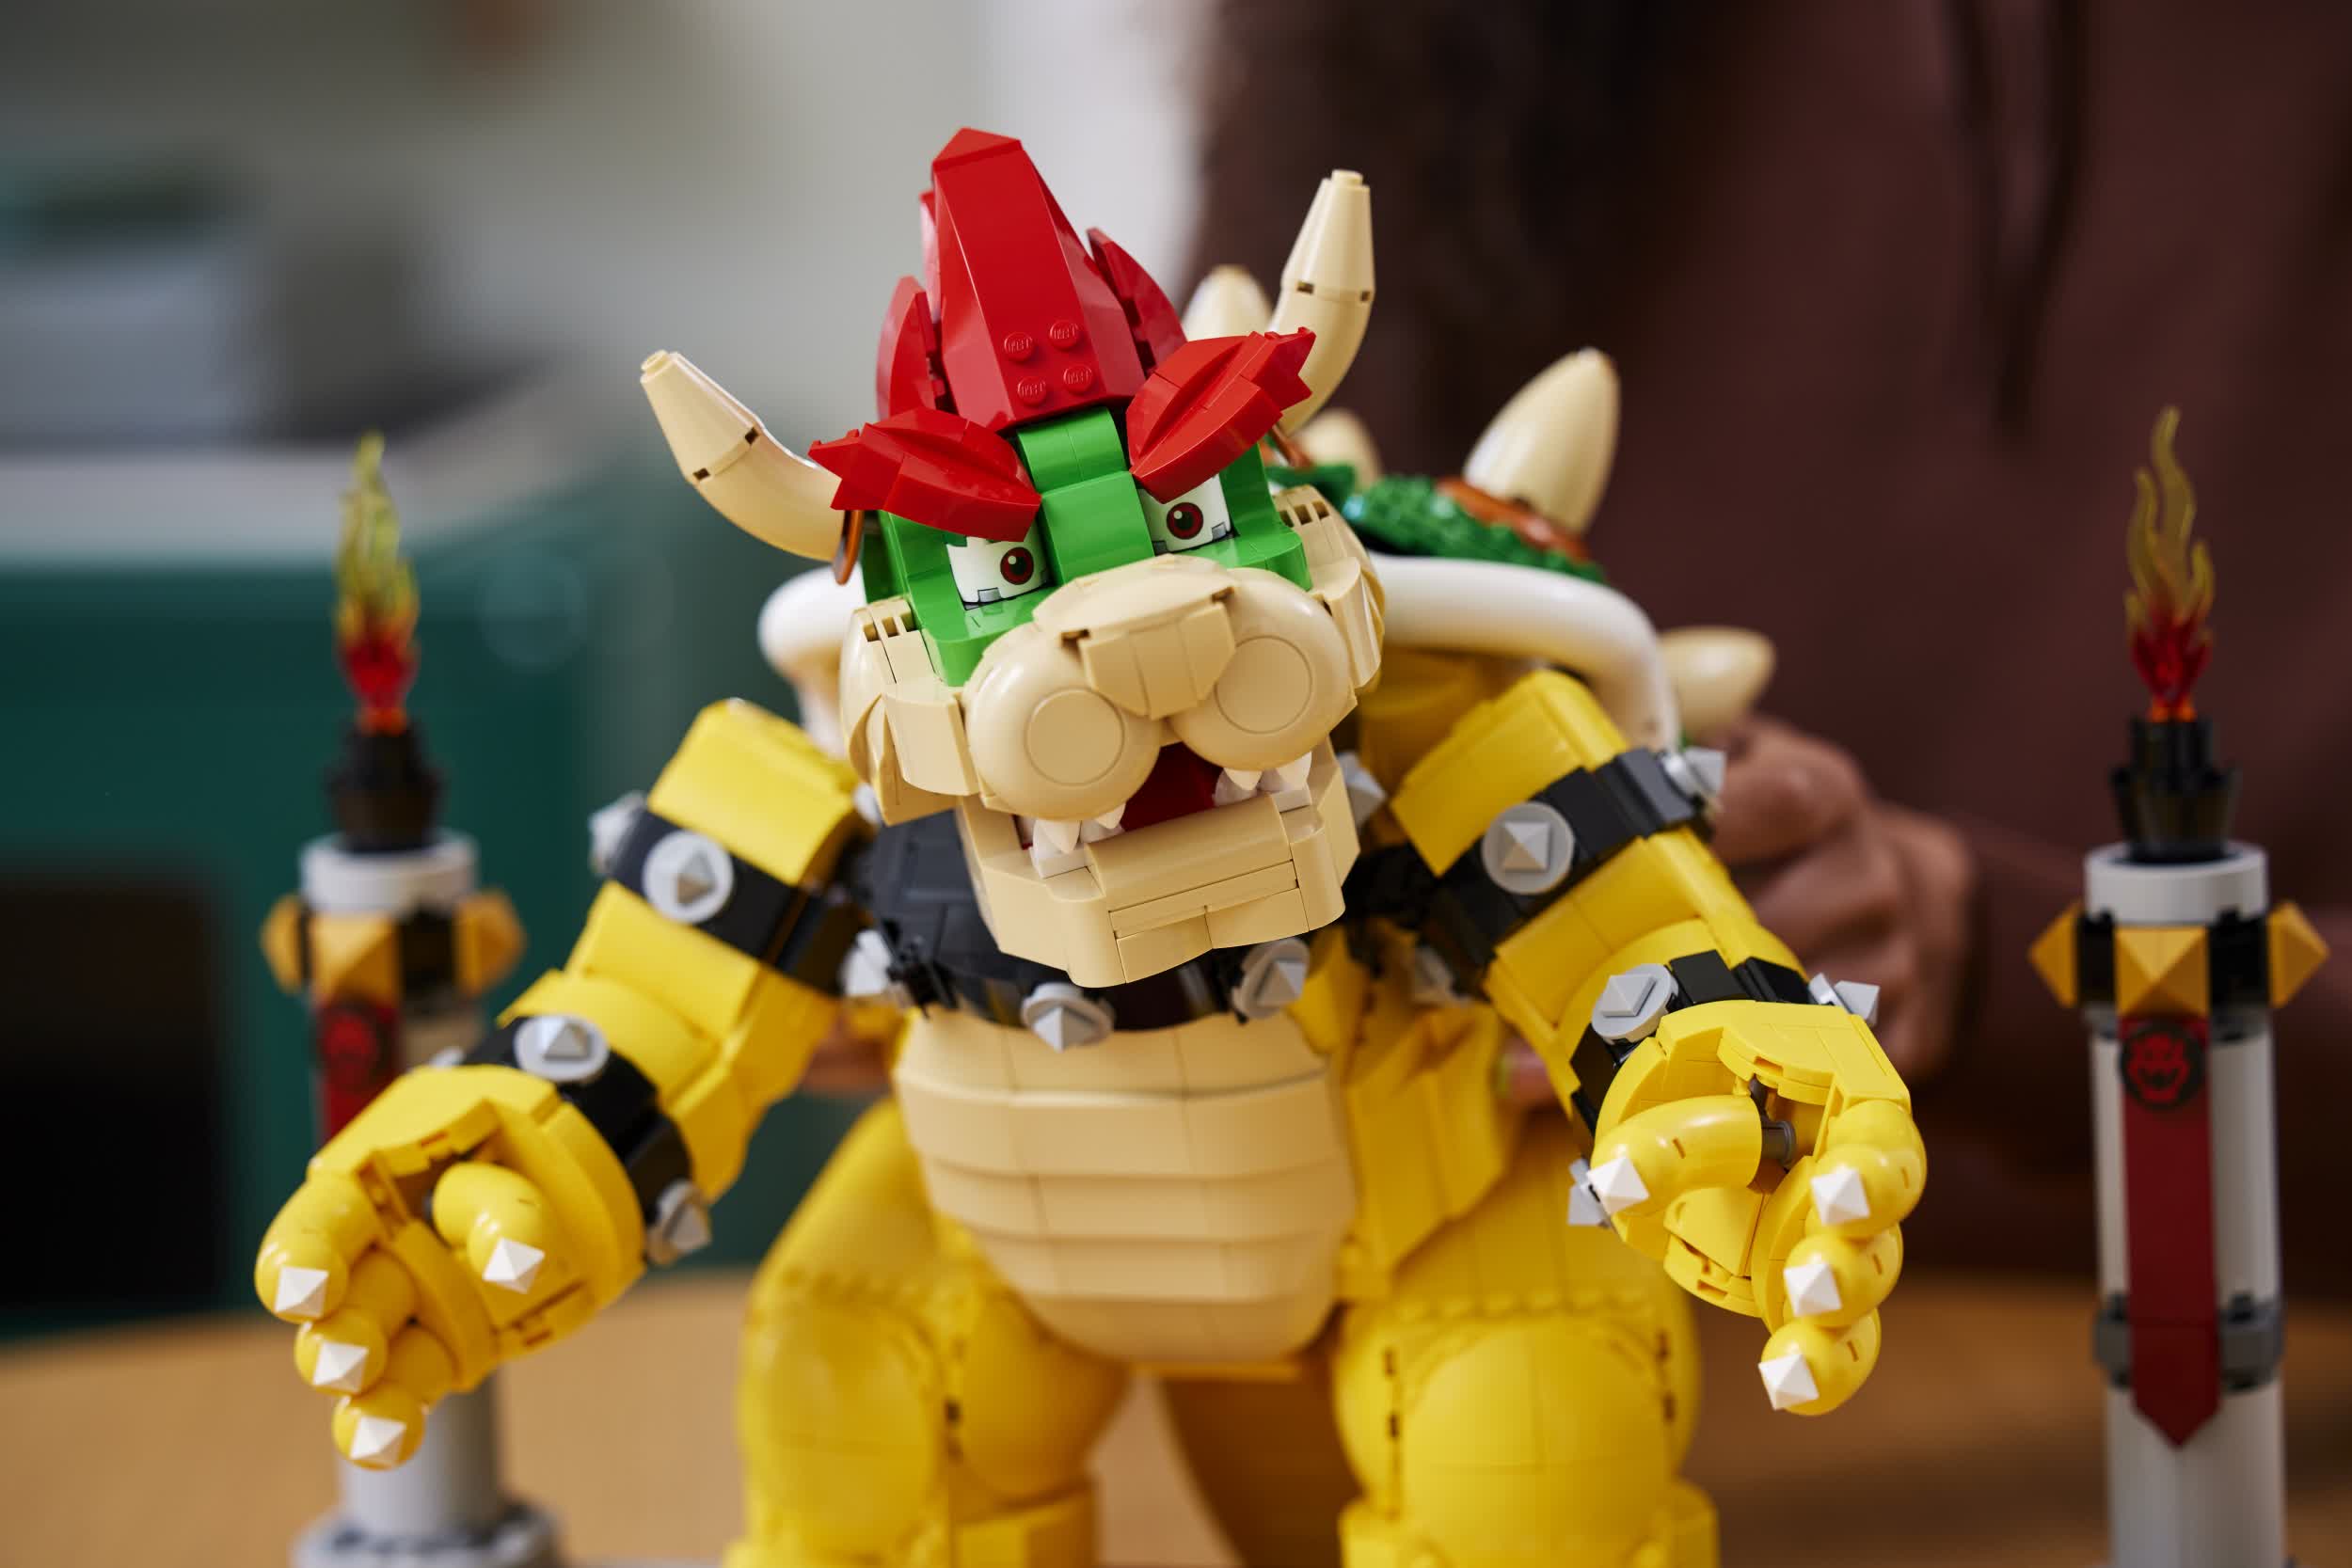 Lego's largest Super Mario set is the 2,807-piece Mighty Bowser